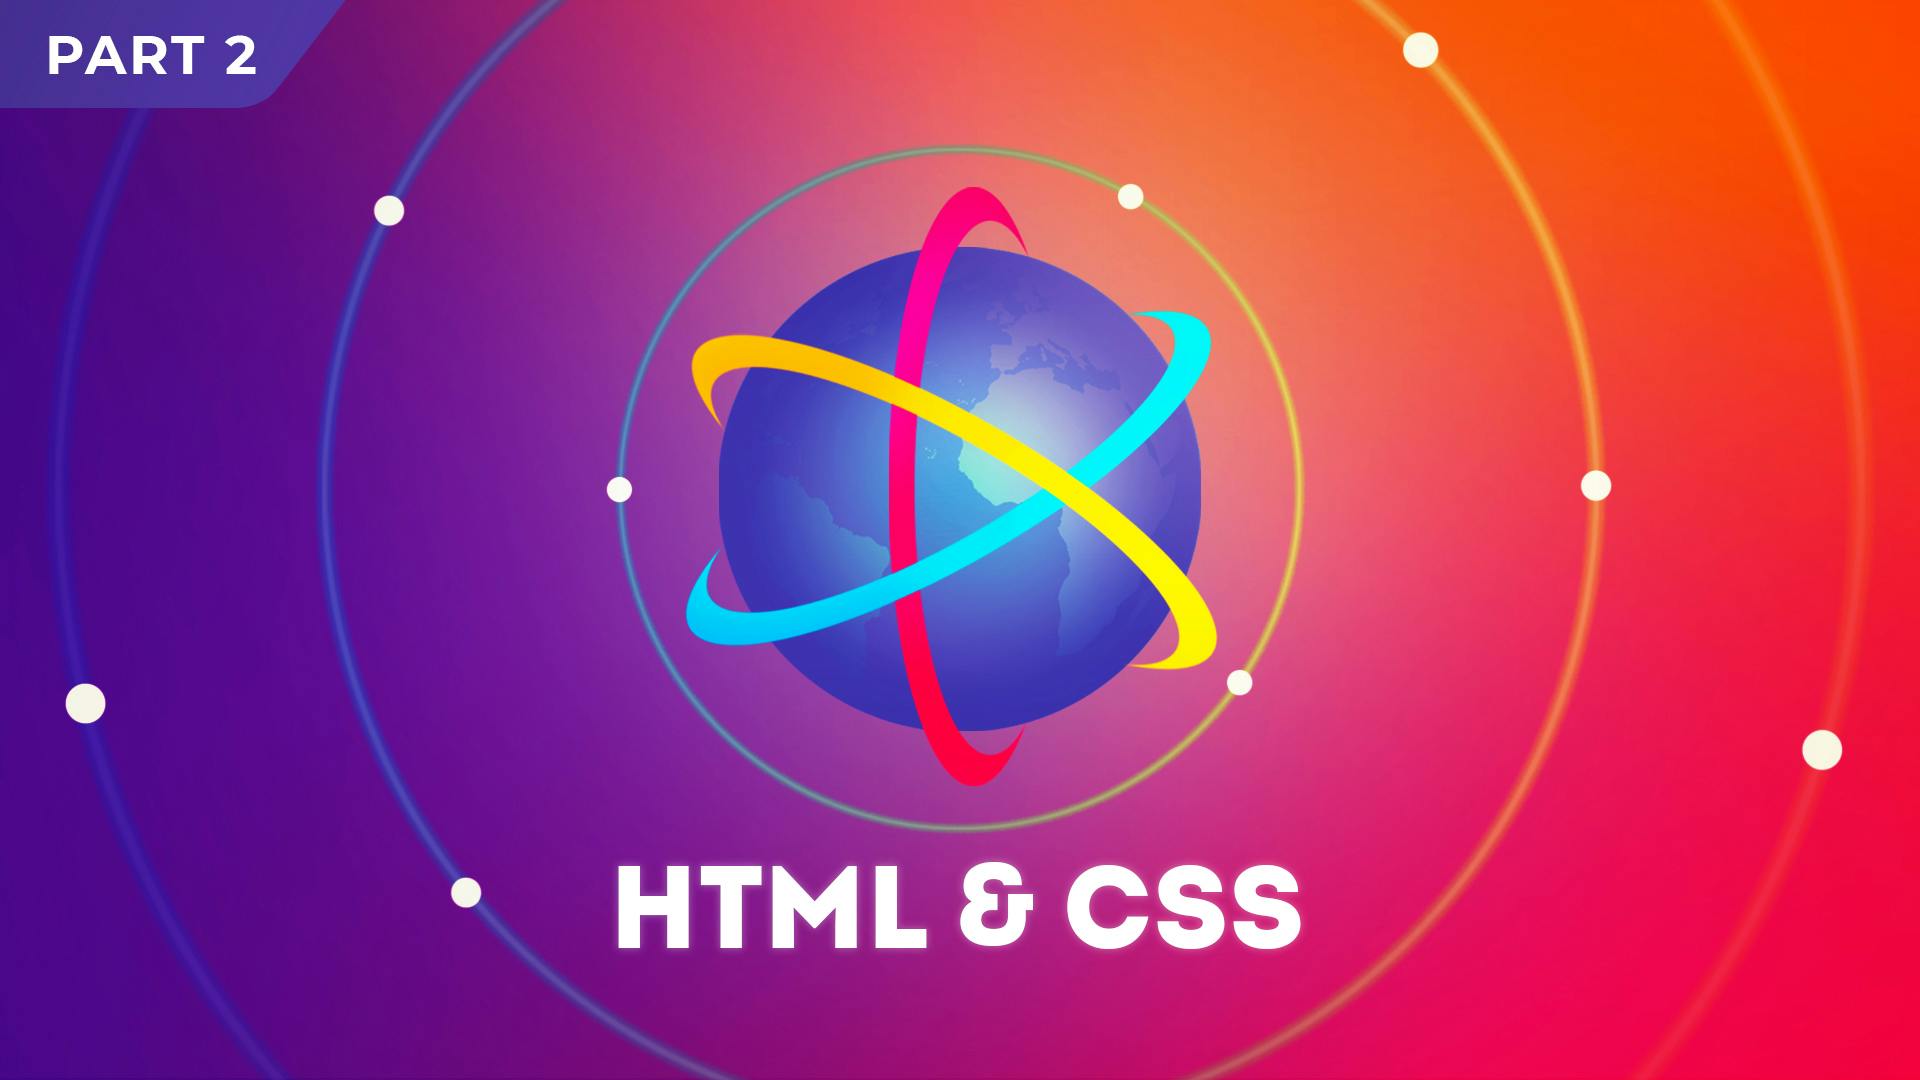 Ultimate HTML & CSS: Part 2